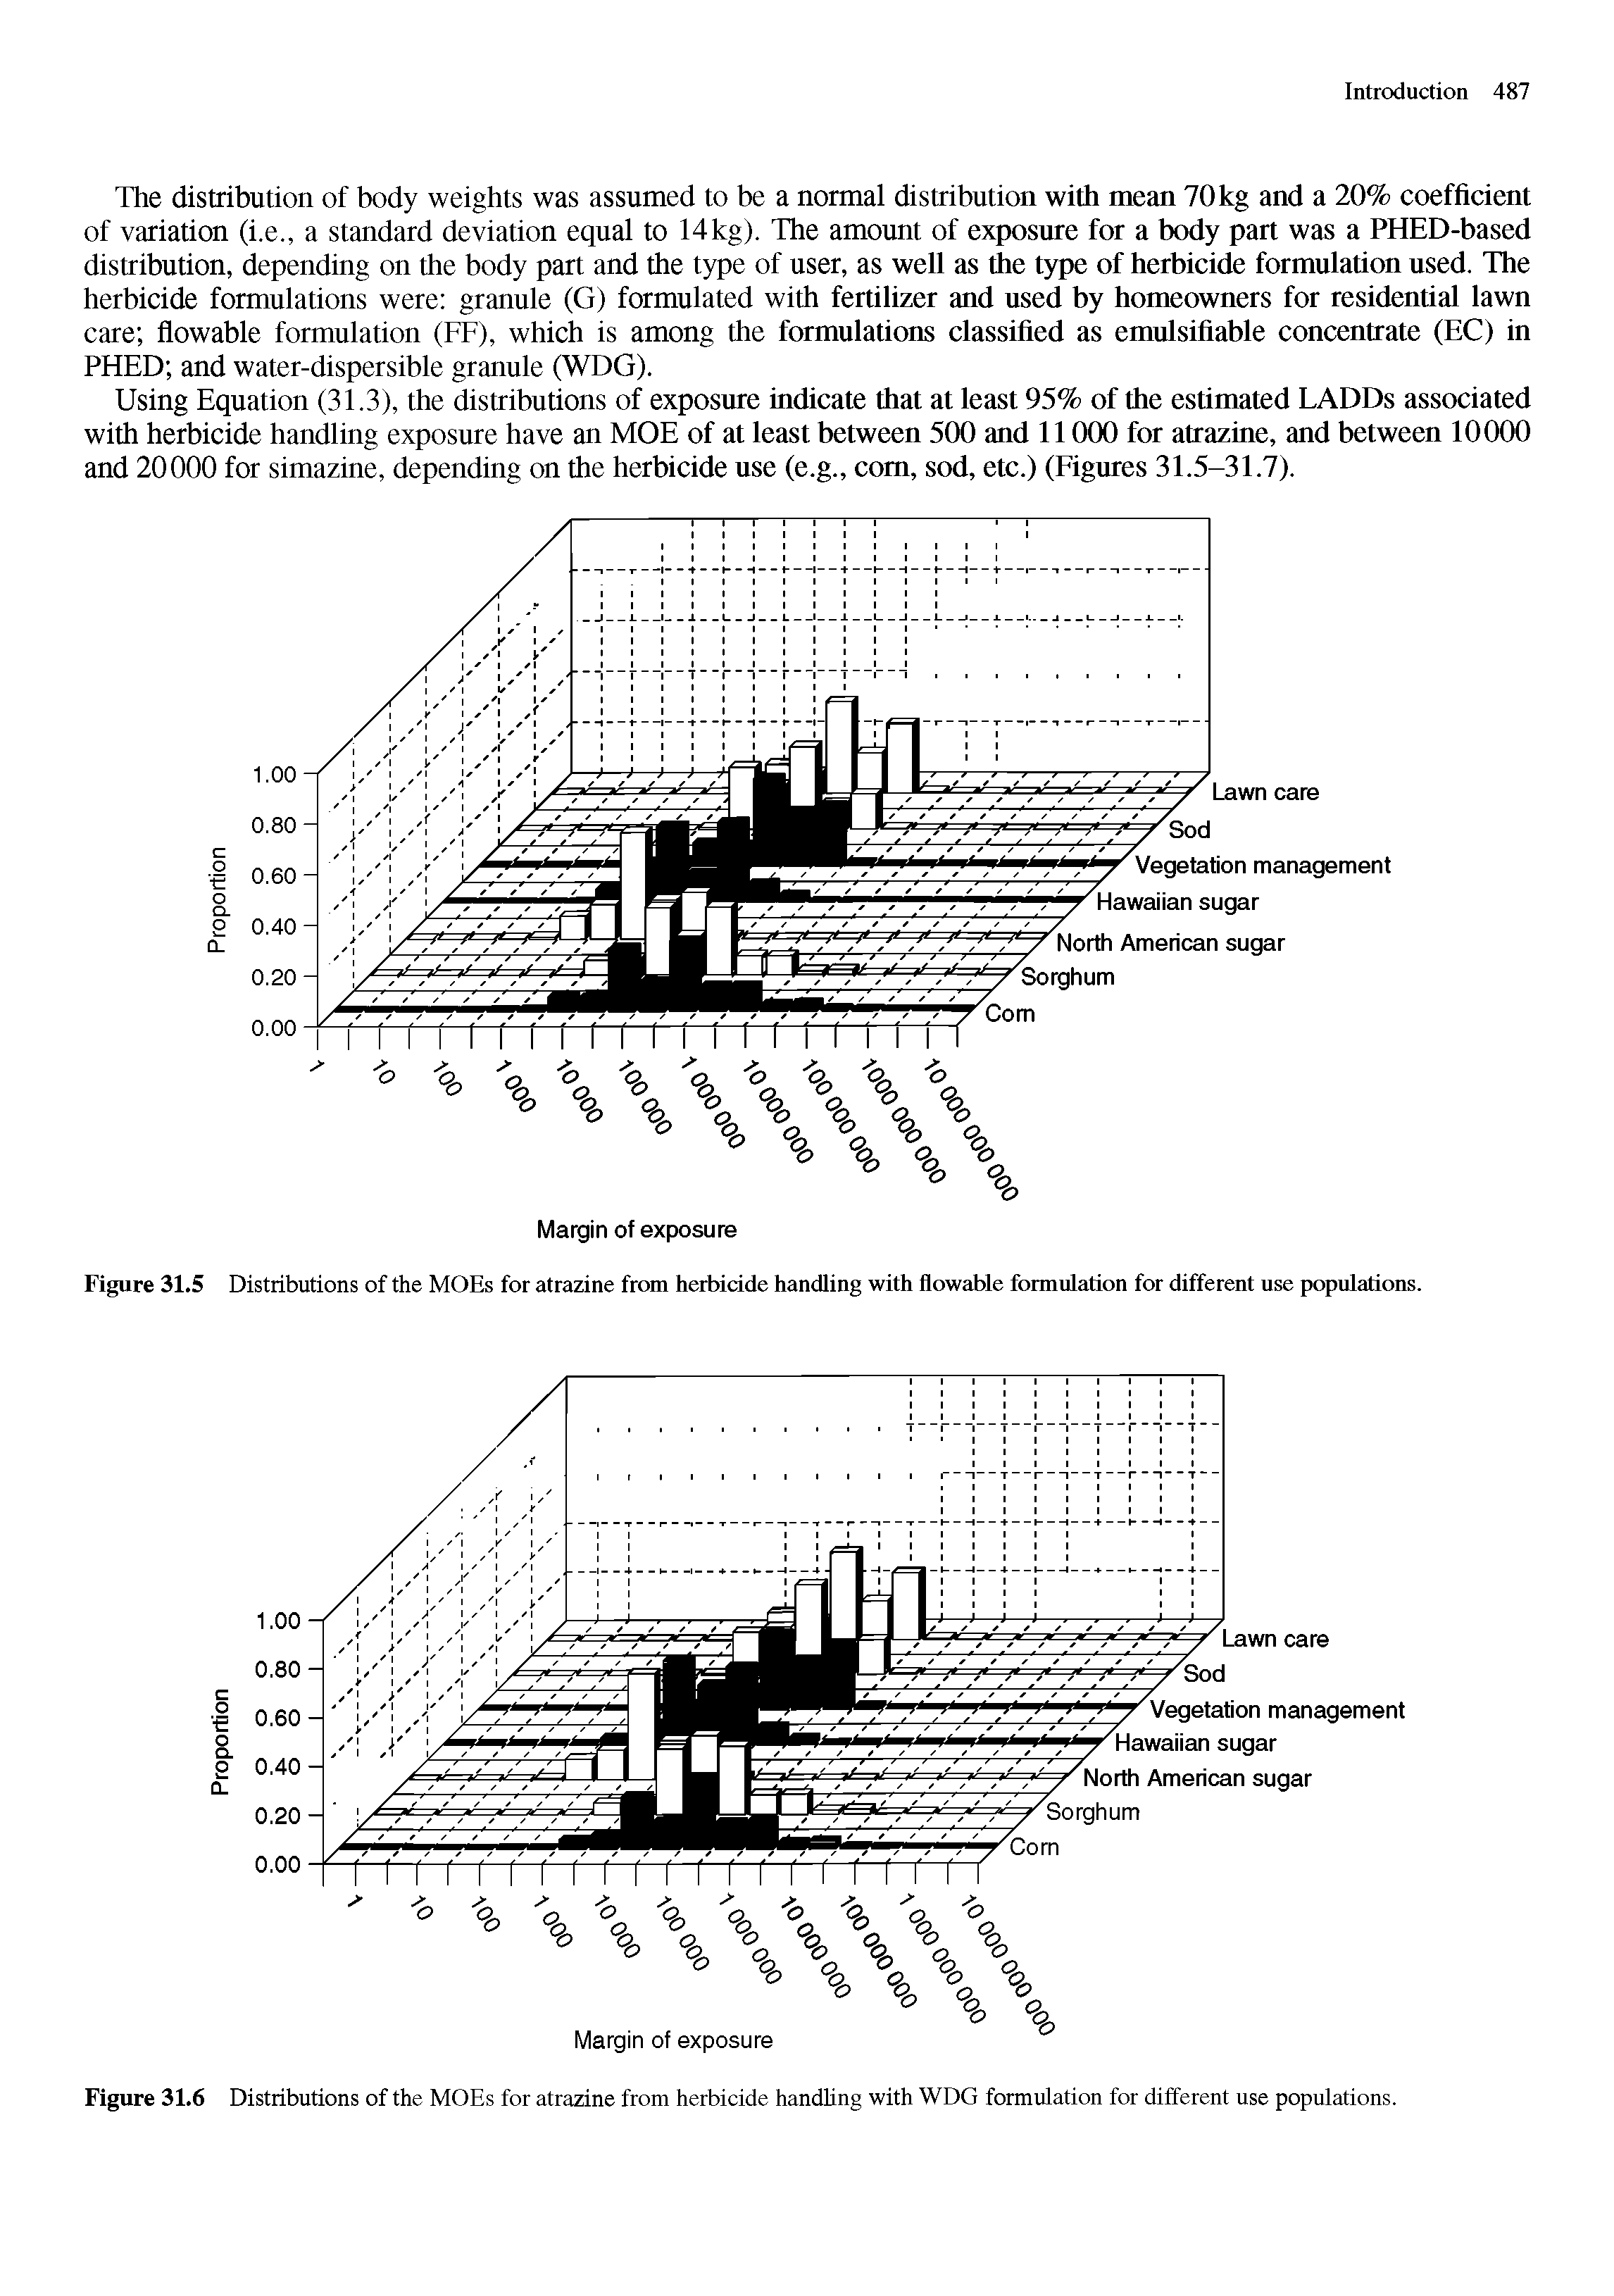 Figure 31.5 Distributions of the MOEs for atrazine from herbicide handling with flowable formulation for different use populations.